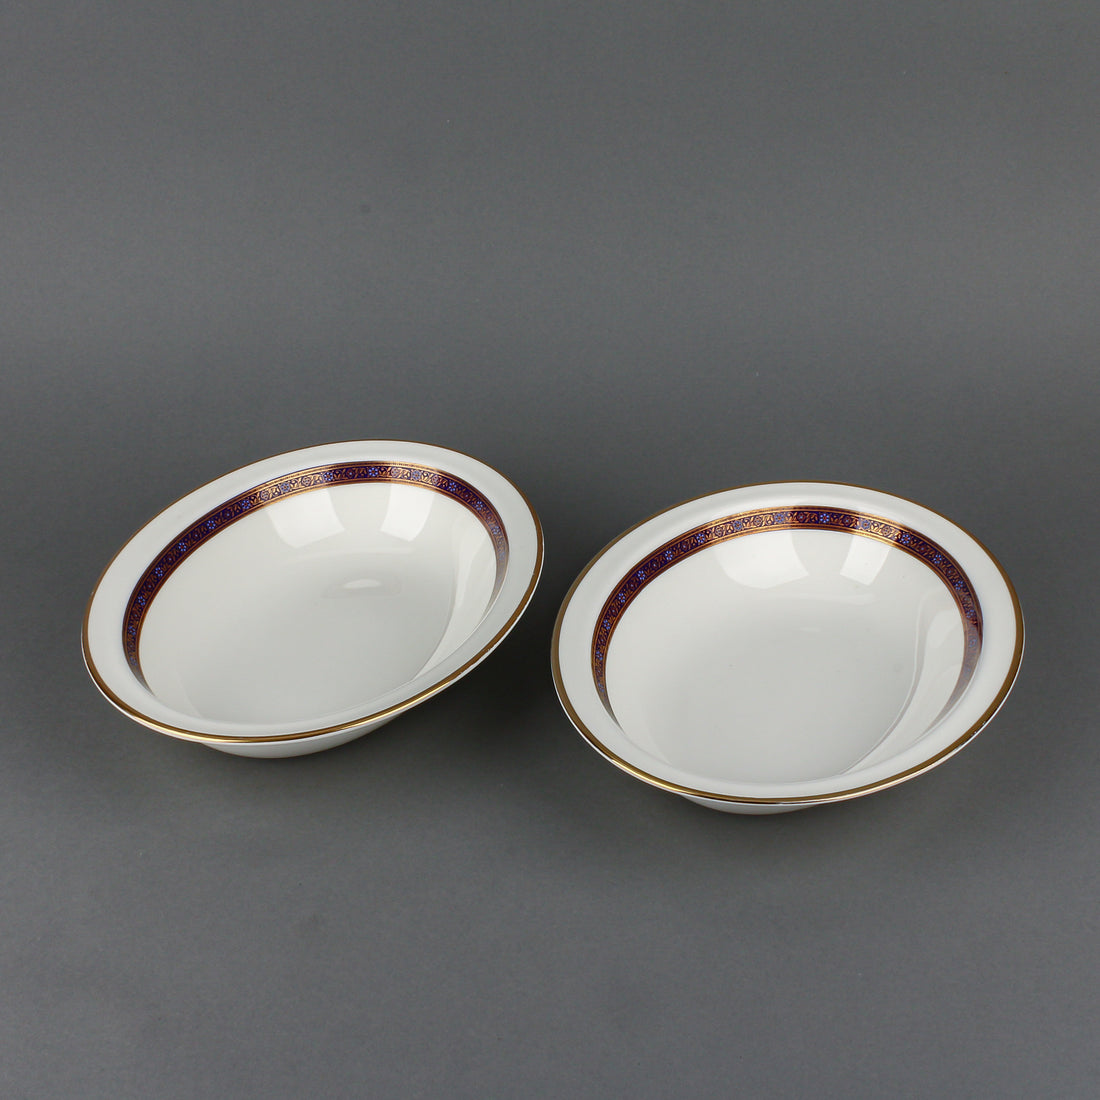 ROYAL DOULTON Harlow Oval Serving Dishes - Set of 2